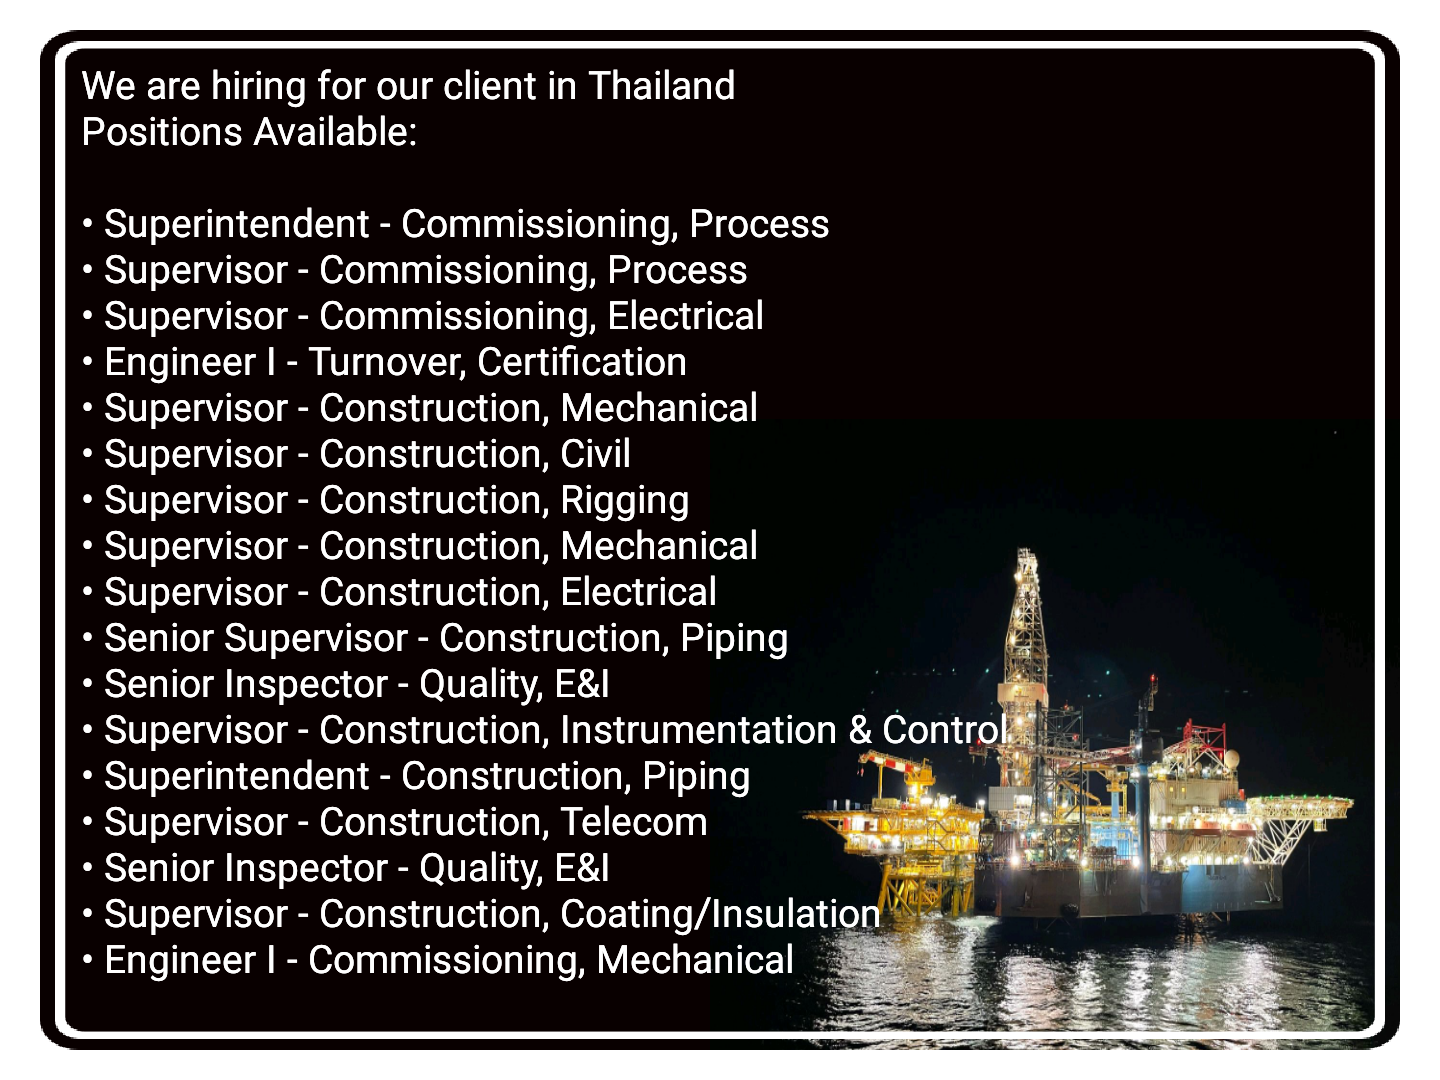 Mechanical, Instrument, Electrical, Process, Piping, Civil & Construction Supervisor Jobs